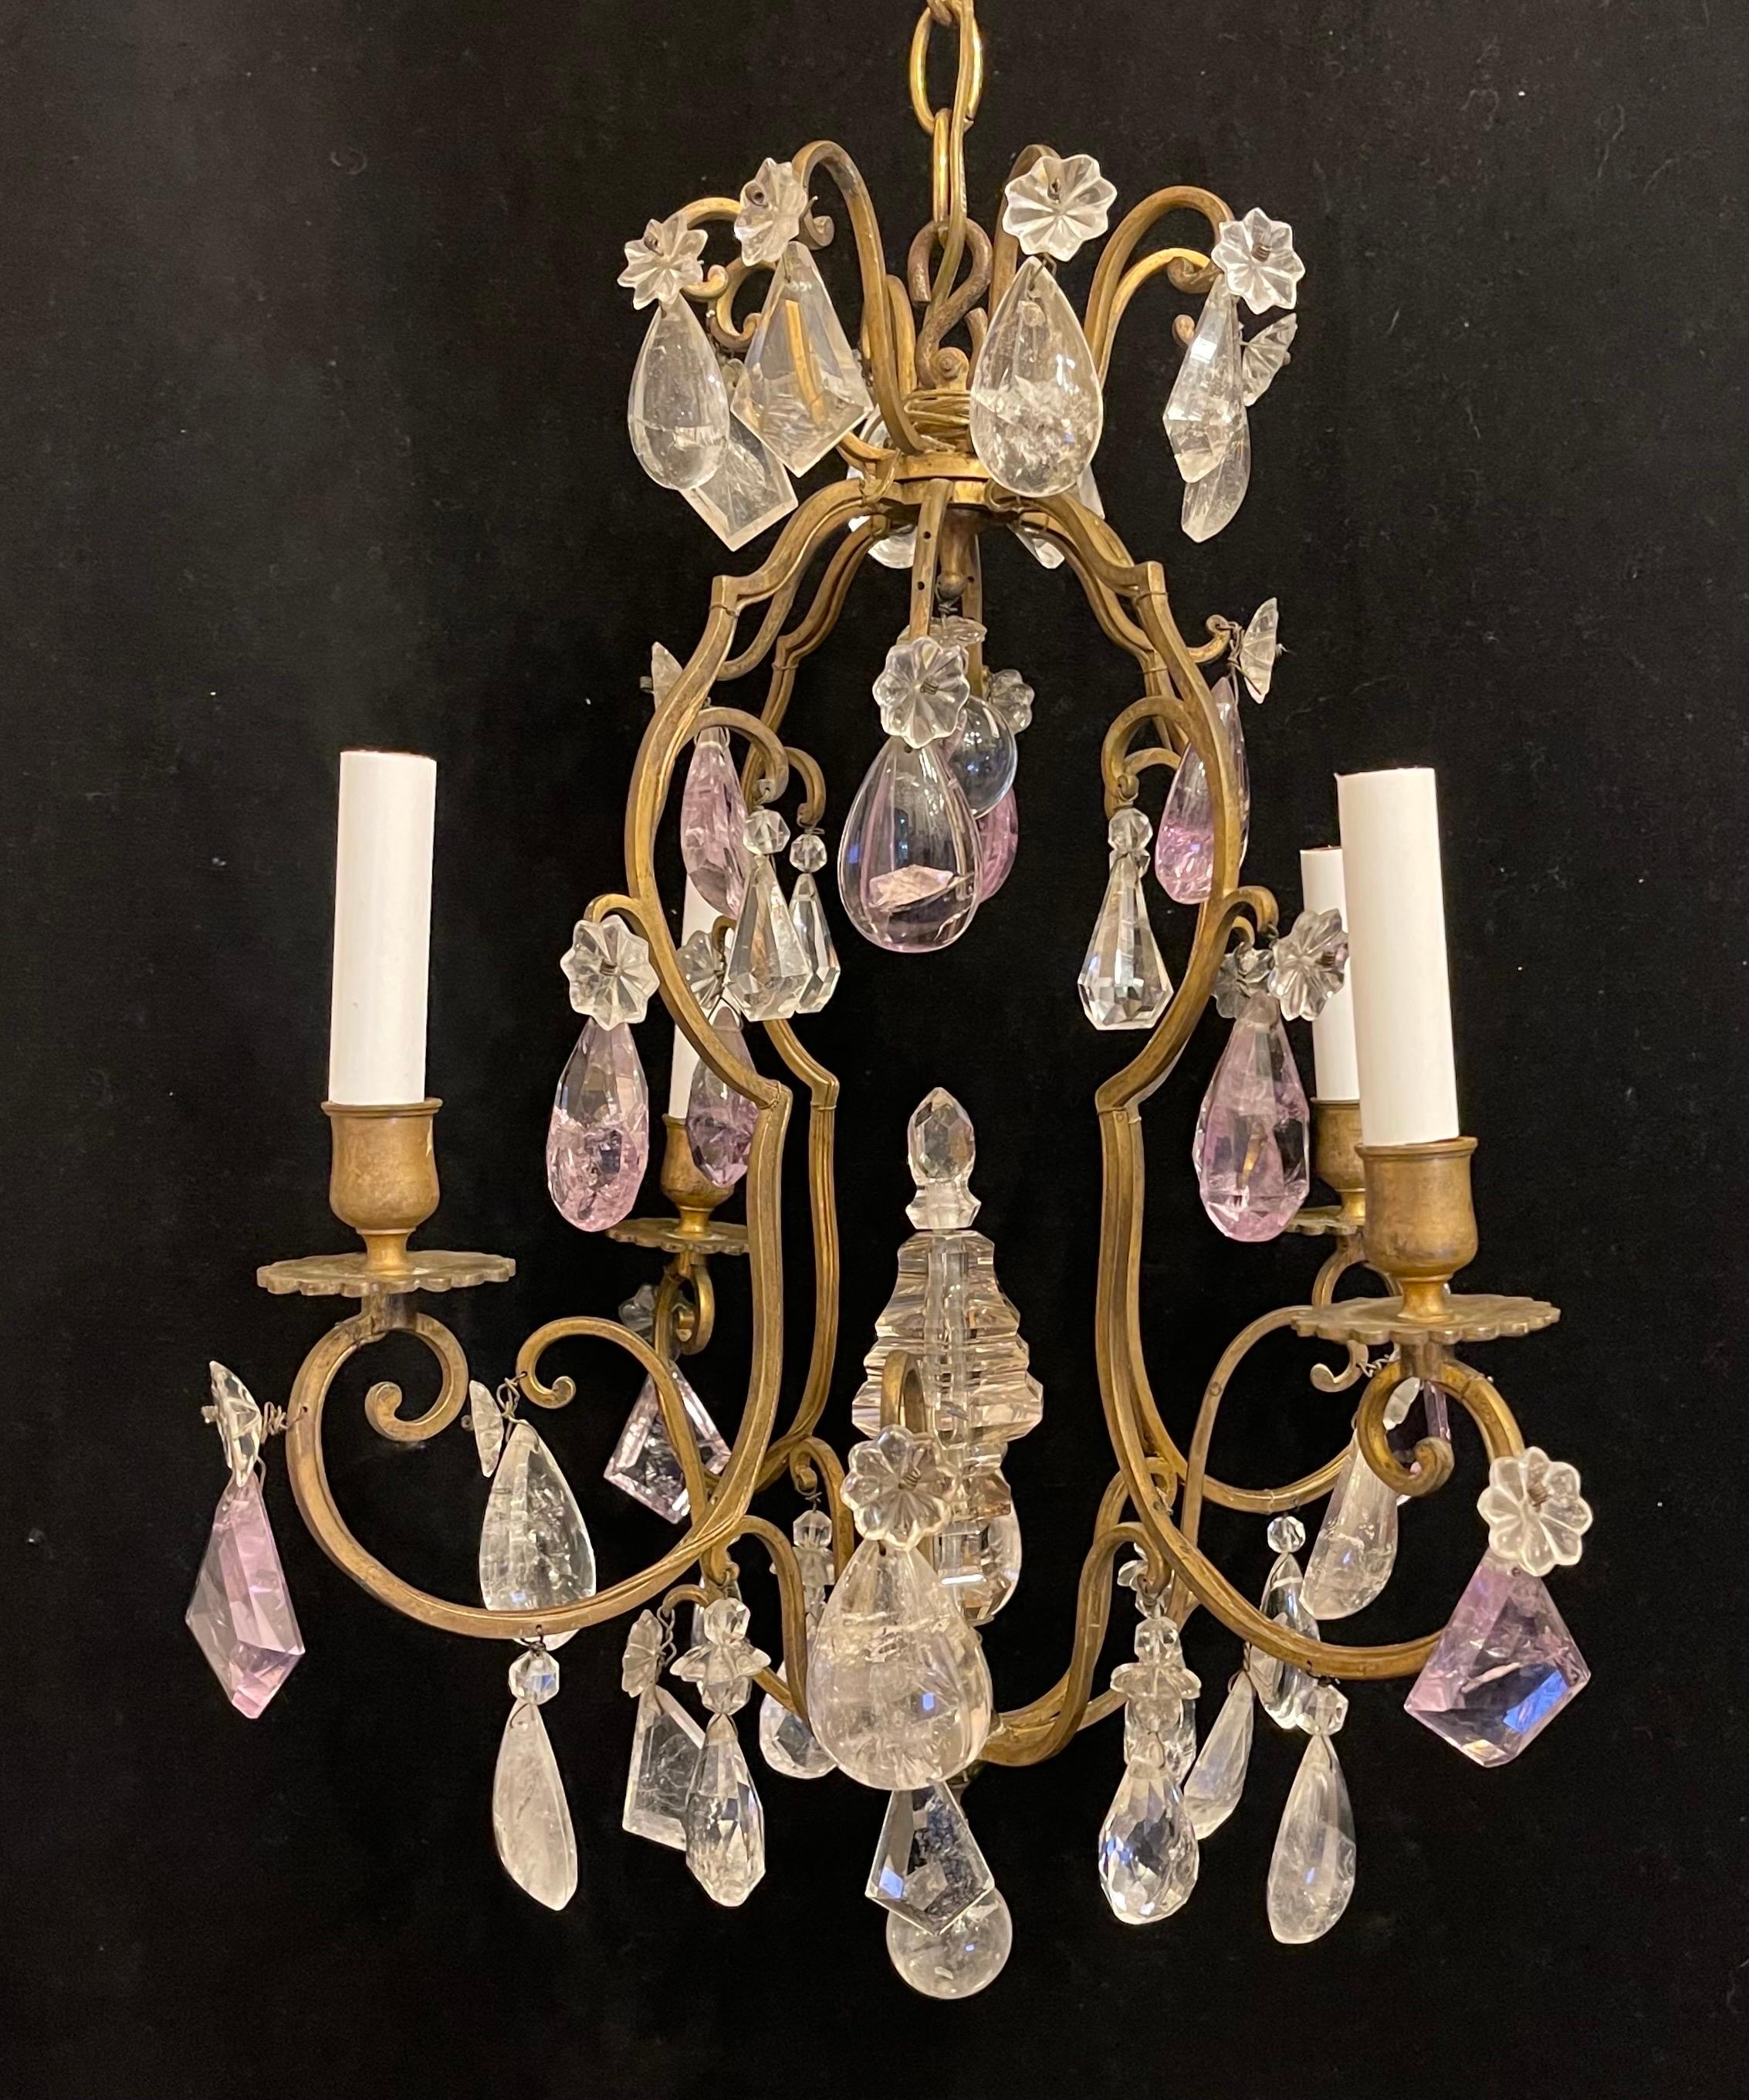 A Fabulous Petite Four Candelabra Light Amethyst Rock Crystal Bronze Bird Cage Form French Chandelier In The Manner Of Maison Baguès.